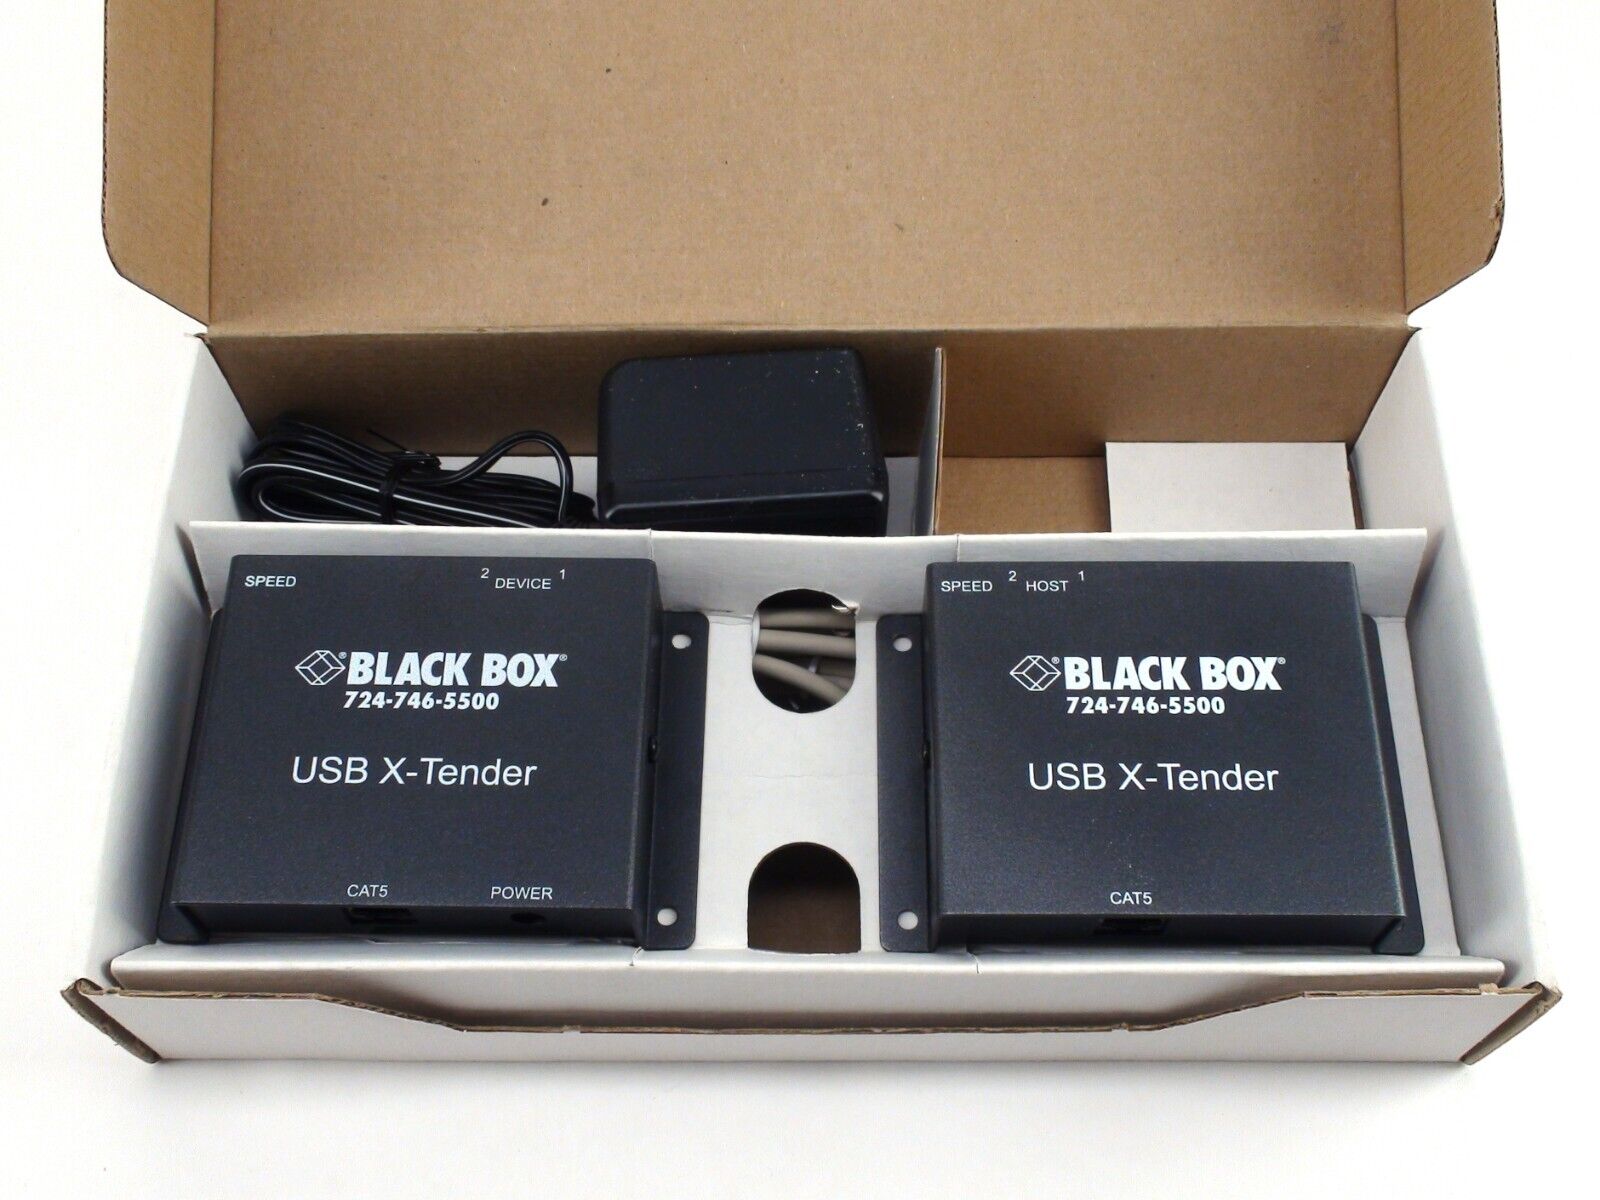 Black Original Box USB X-Tender -Extend USB Cable Connection with 2X Transceiver